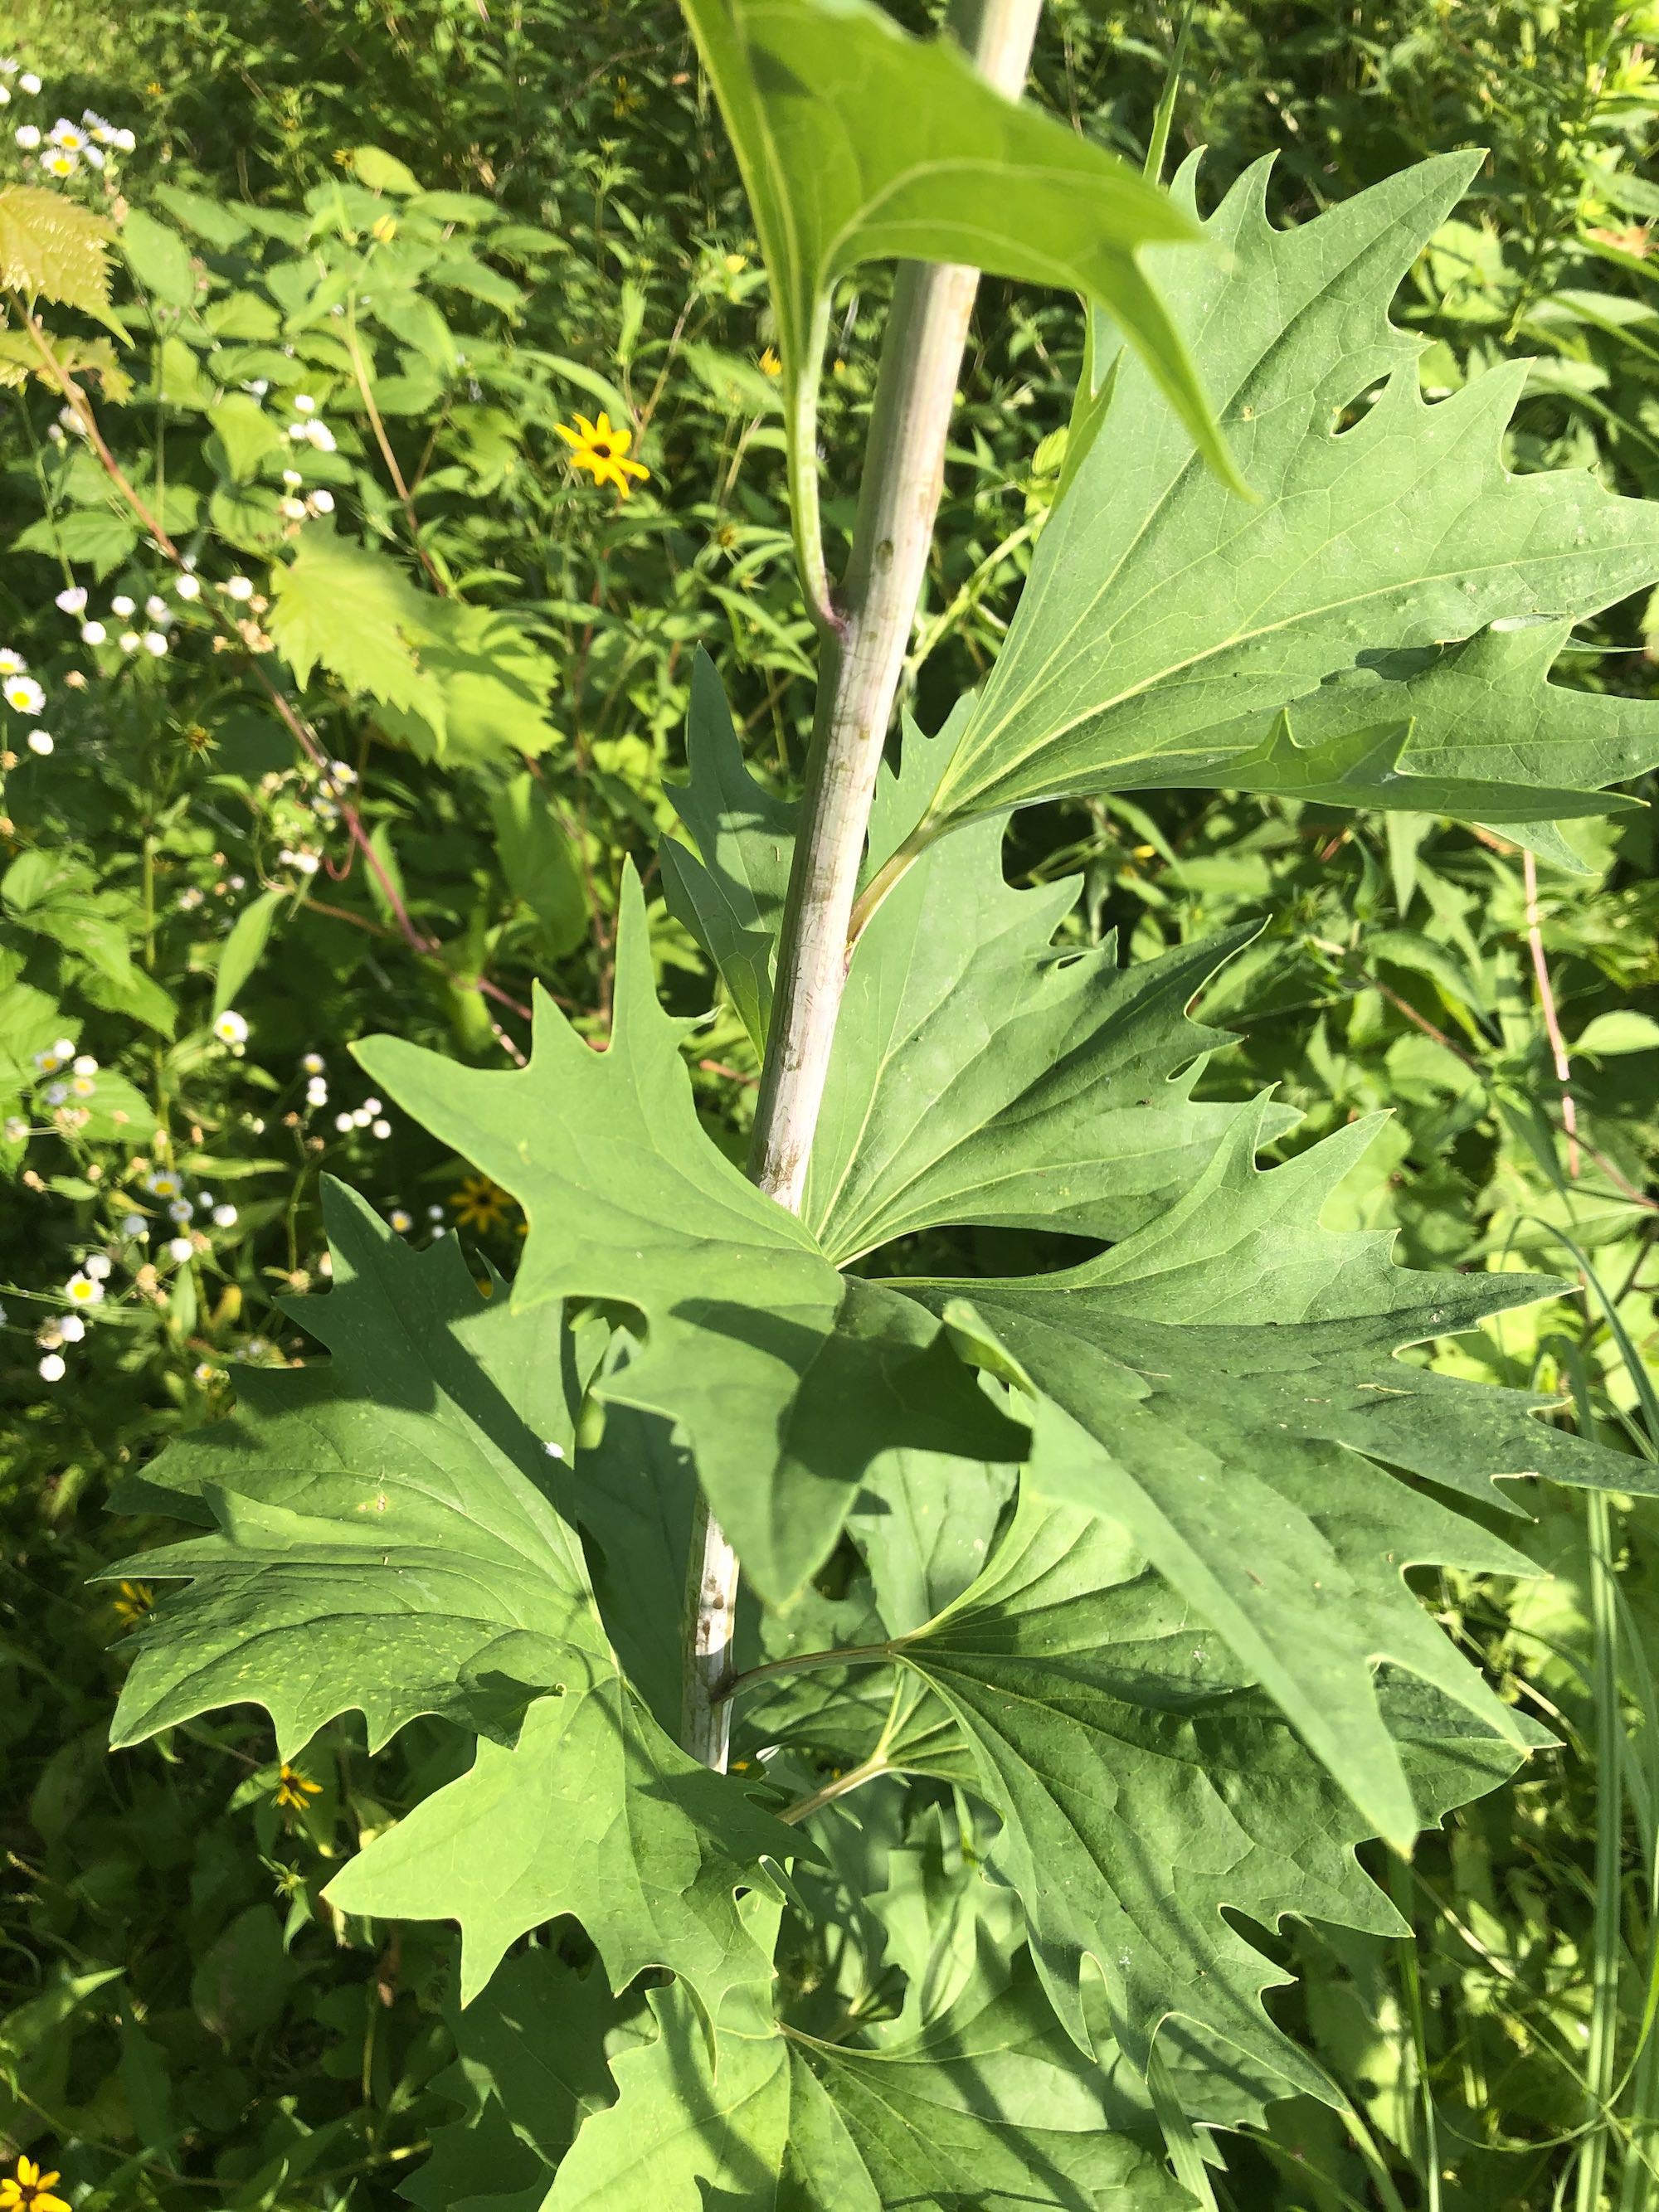 Pale Indian Plantain leaves and stalk in Marion Dunn Prarie in Madison, Wisconsin on July 26, 2020.